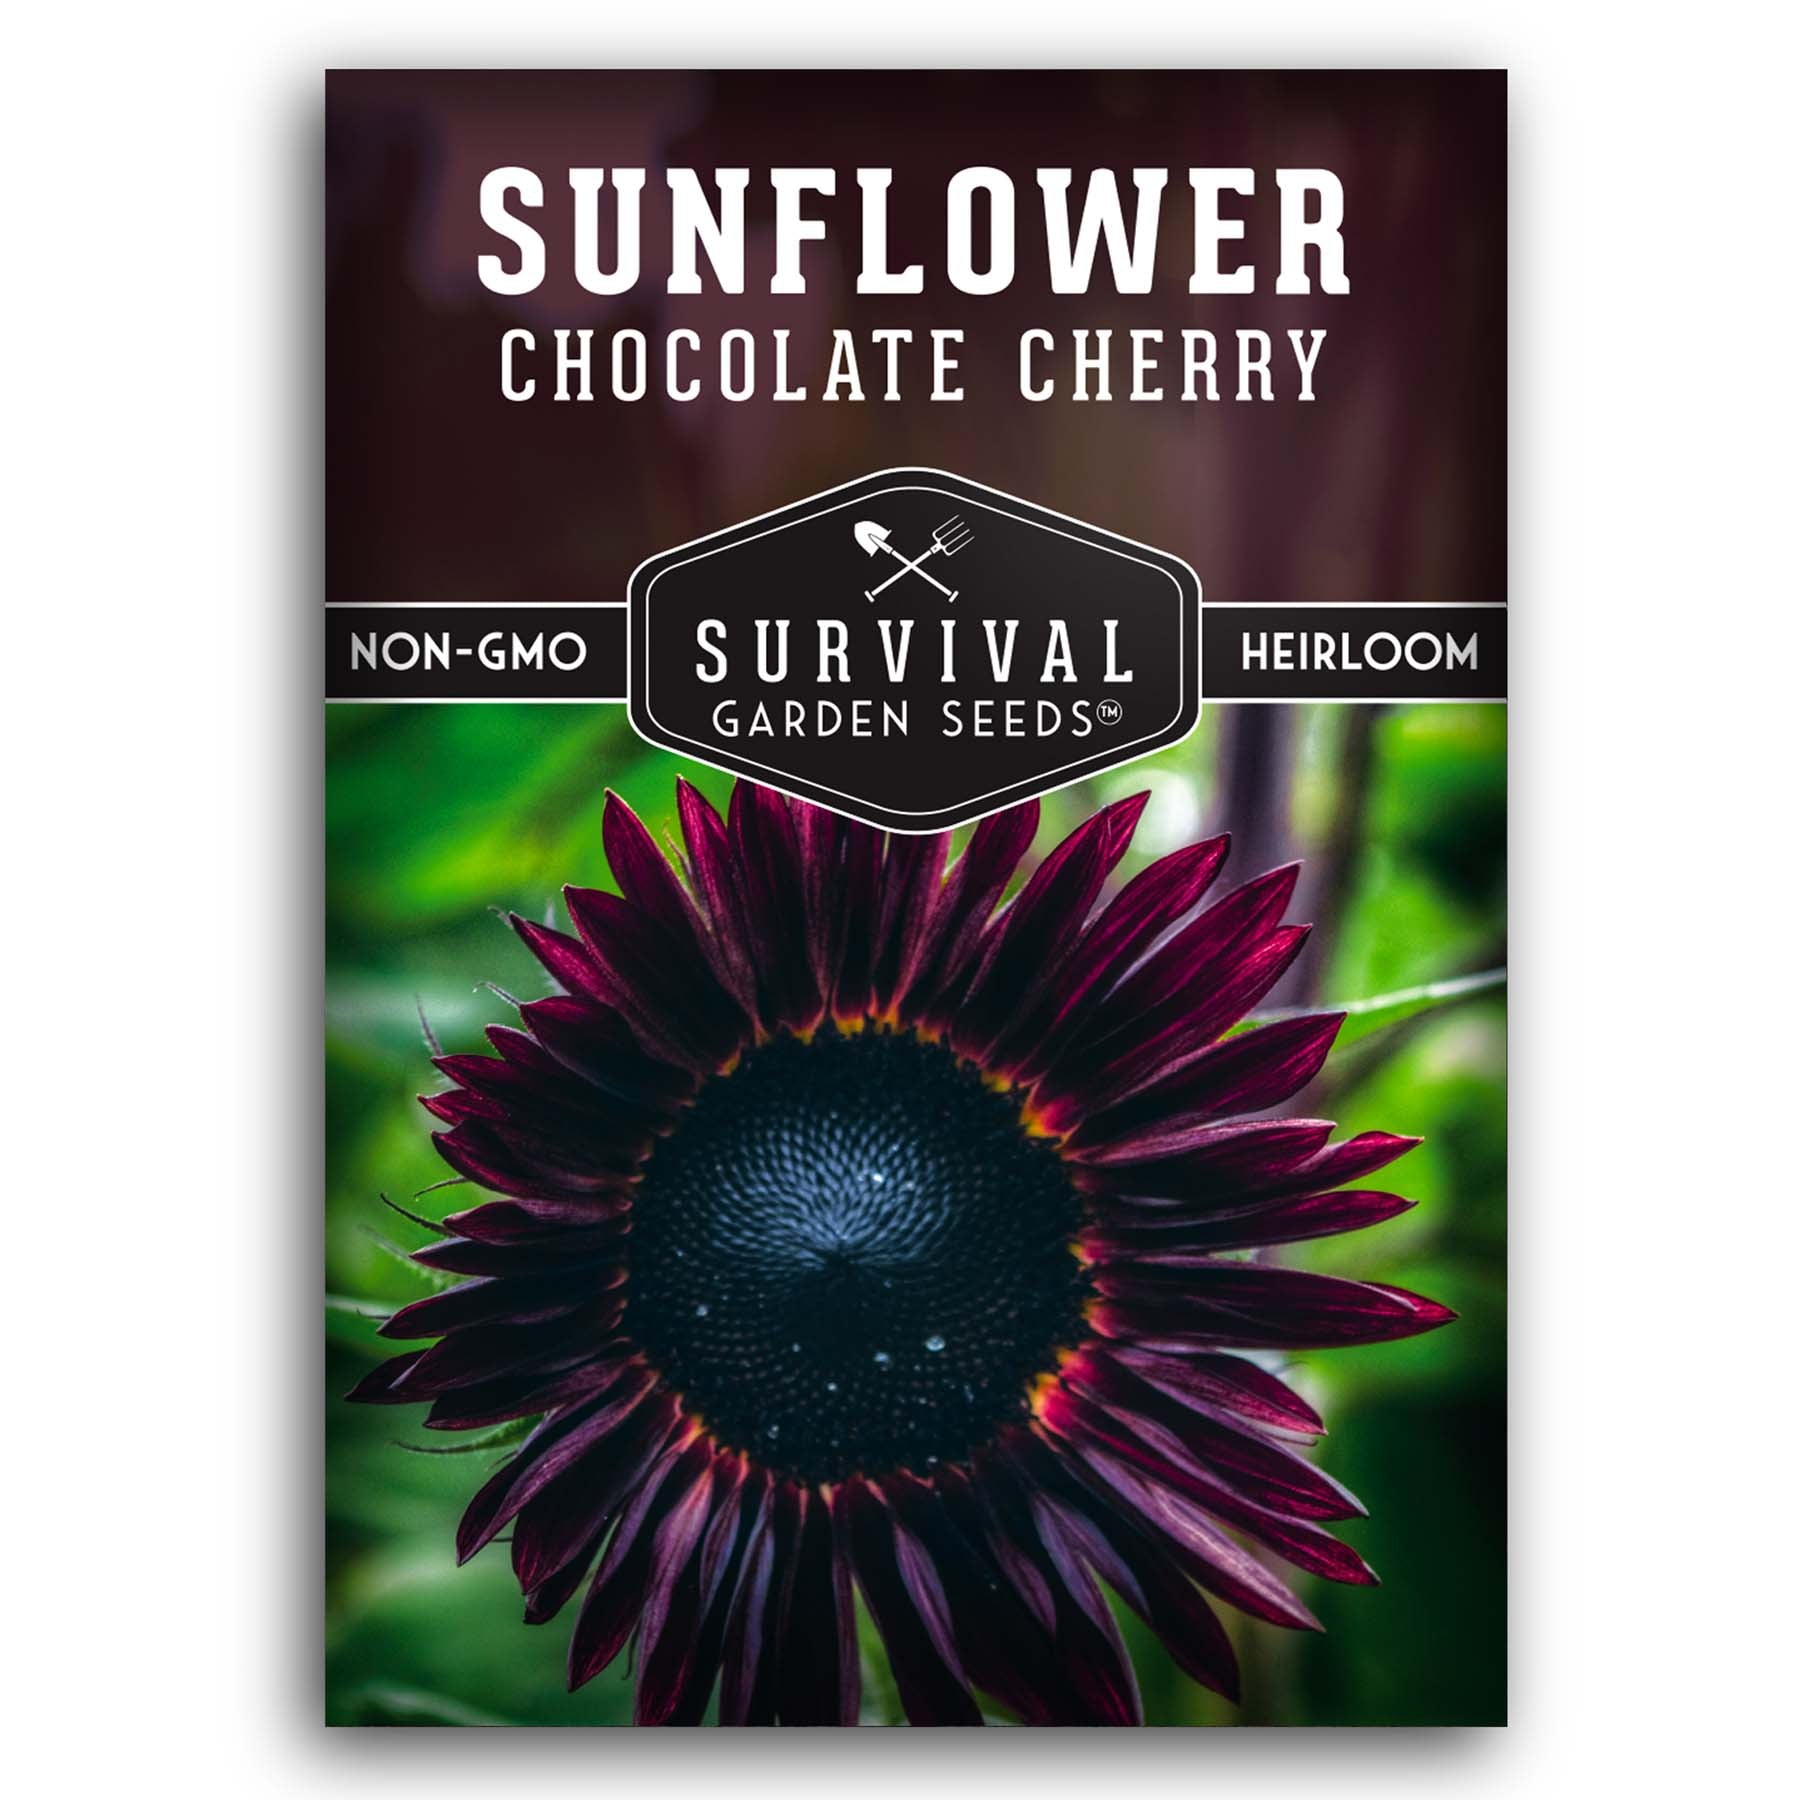 Chocolate Cherry Sunflower Seeds for planting